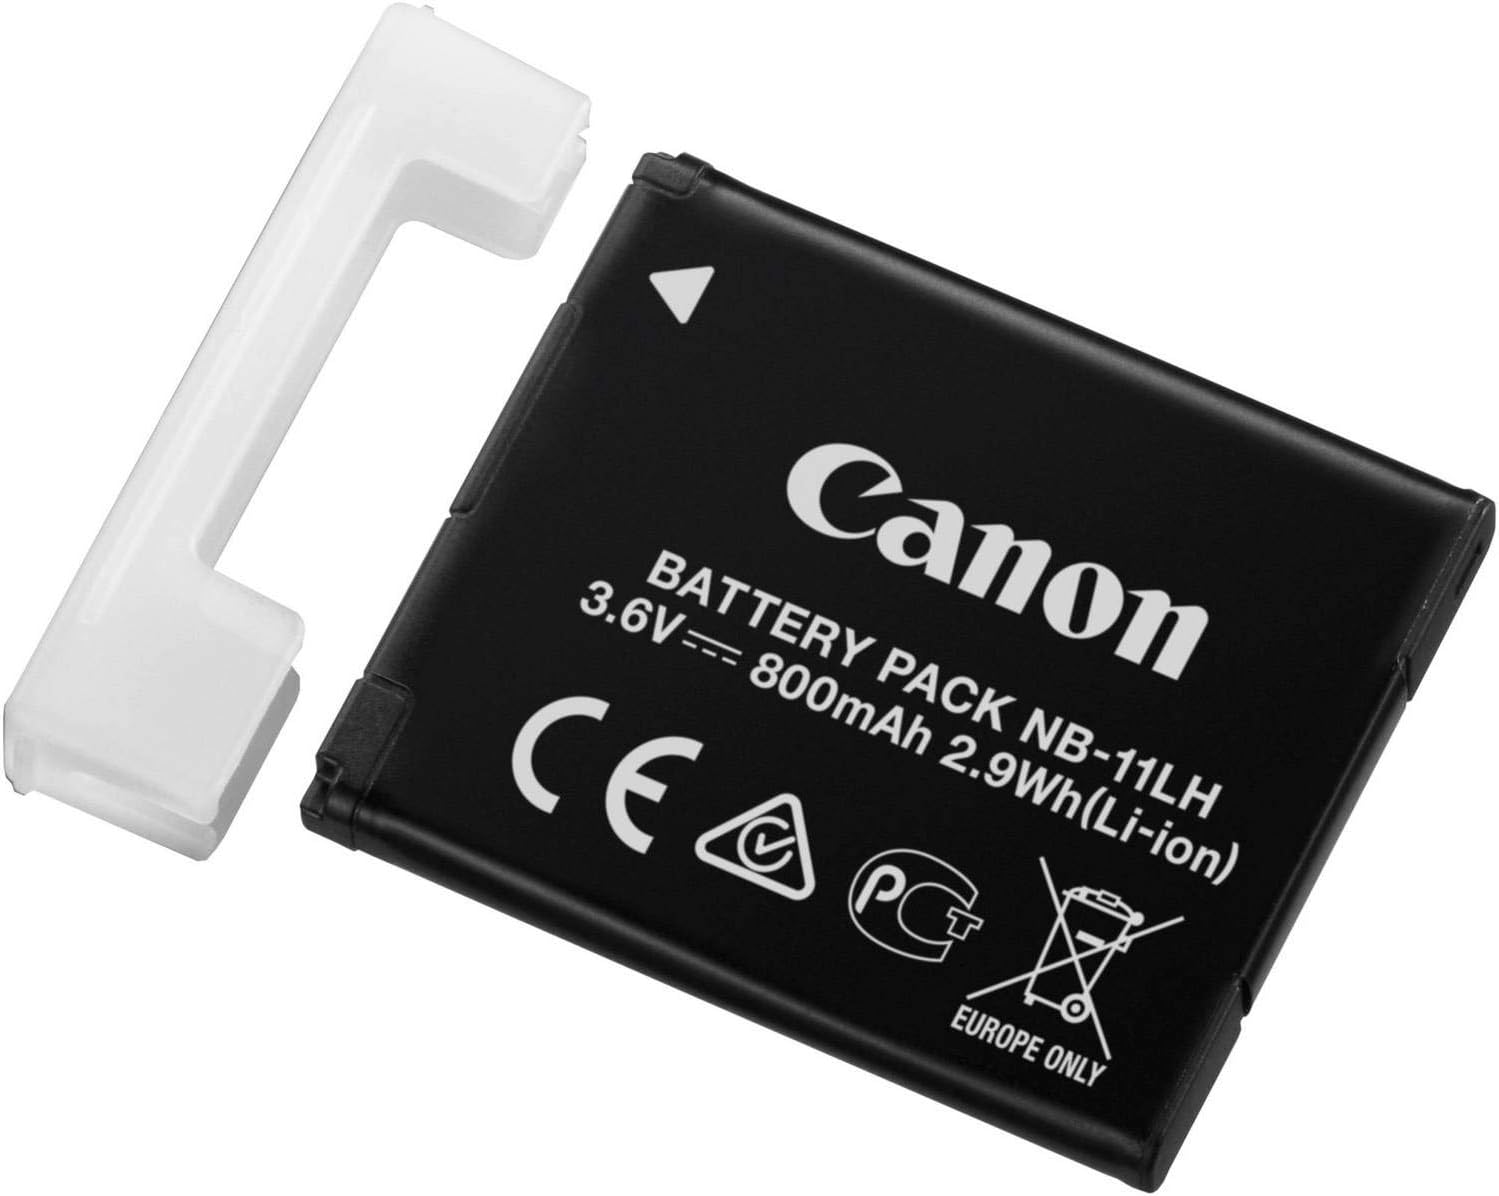 Canon NB-11LH Battery Pack - Pristine